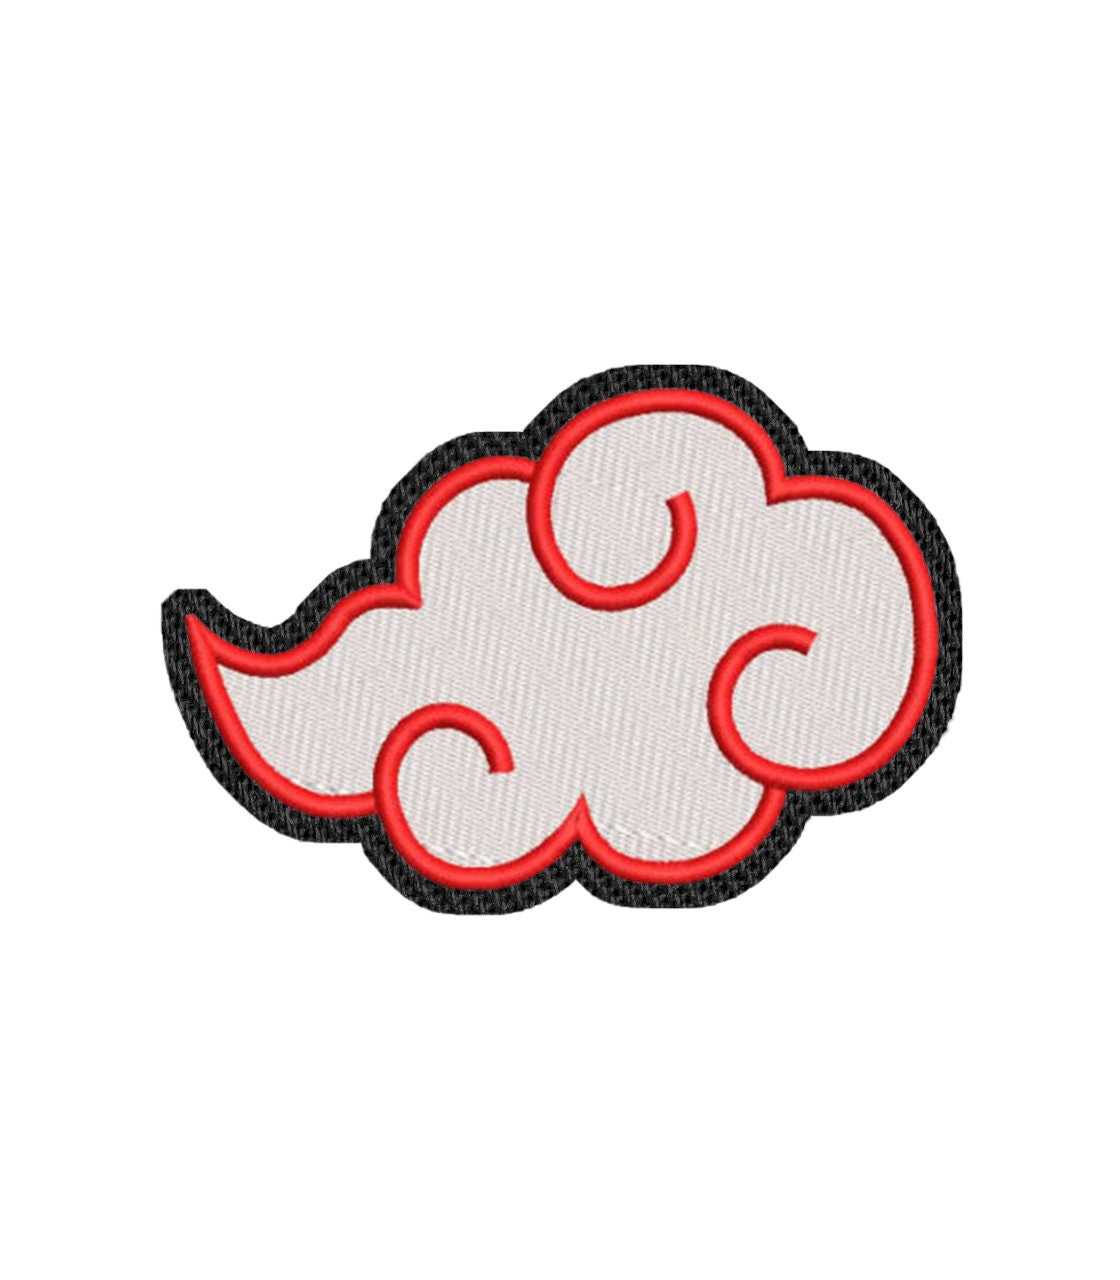 Red and White Cloud Iron on Patch / Sew on embroidered patches Shapes Anime Embroidery Women Applique Merit Badge for Clothing Jacket